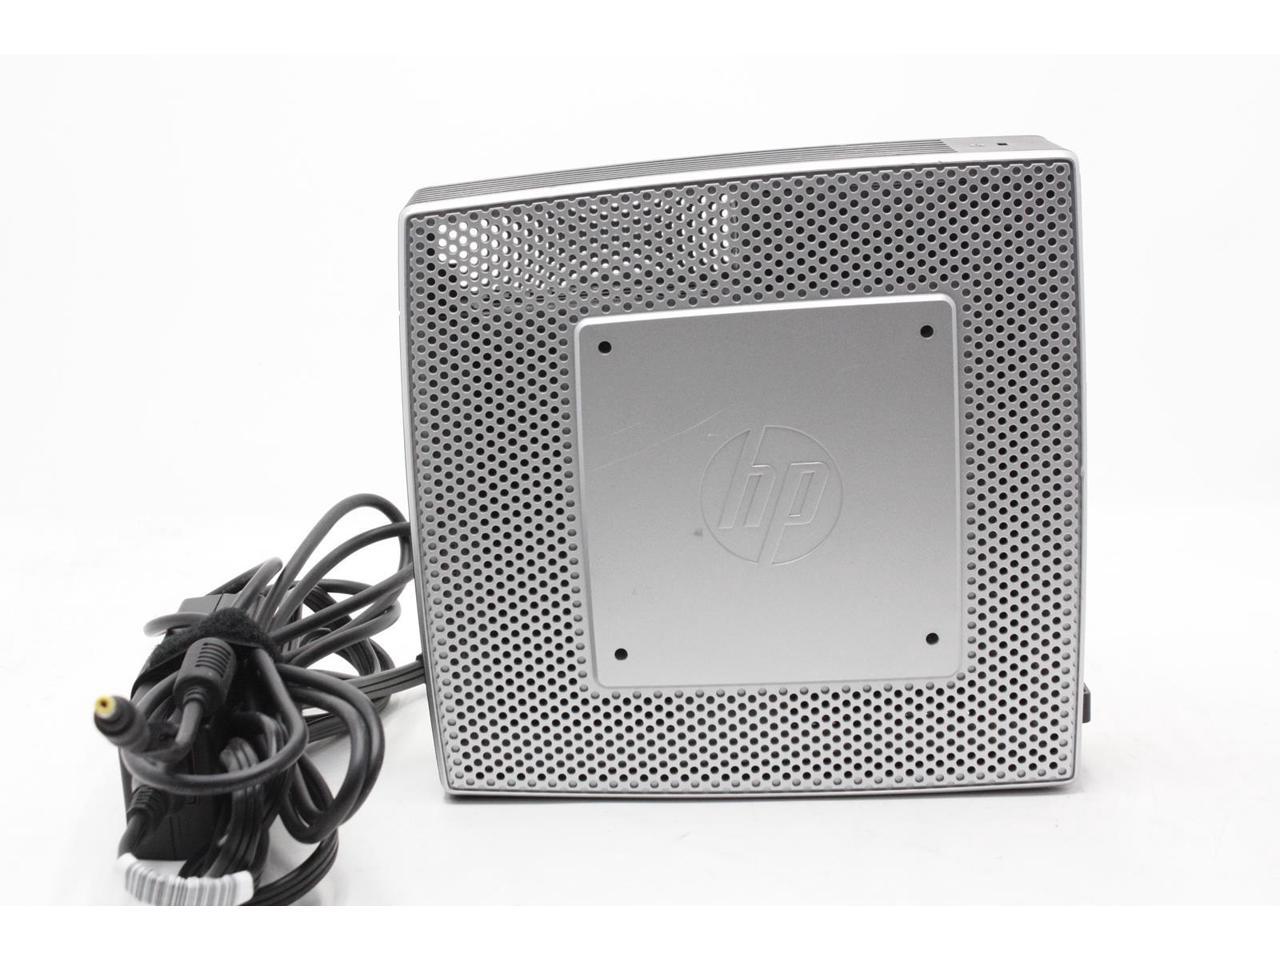 Hp T510 Thin Client Hstnc 012 Tc 2 Gb Ddr3 No Base Includes Power Supply Newegg Com